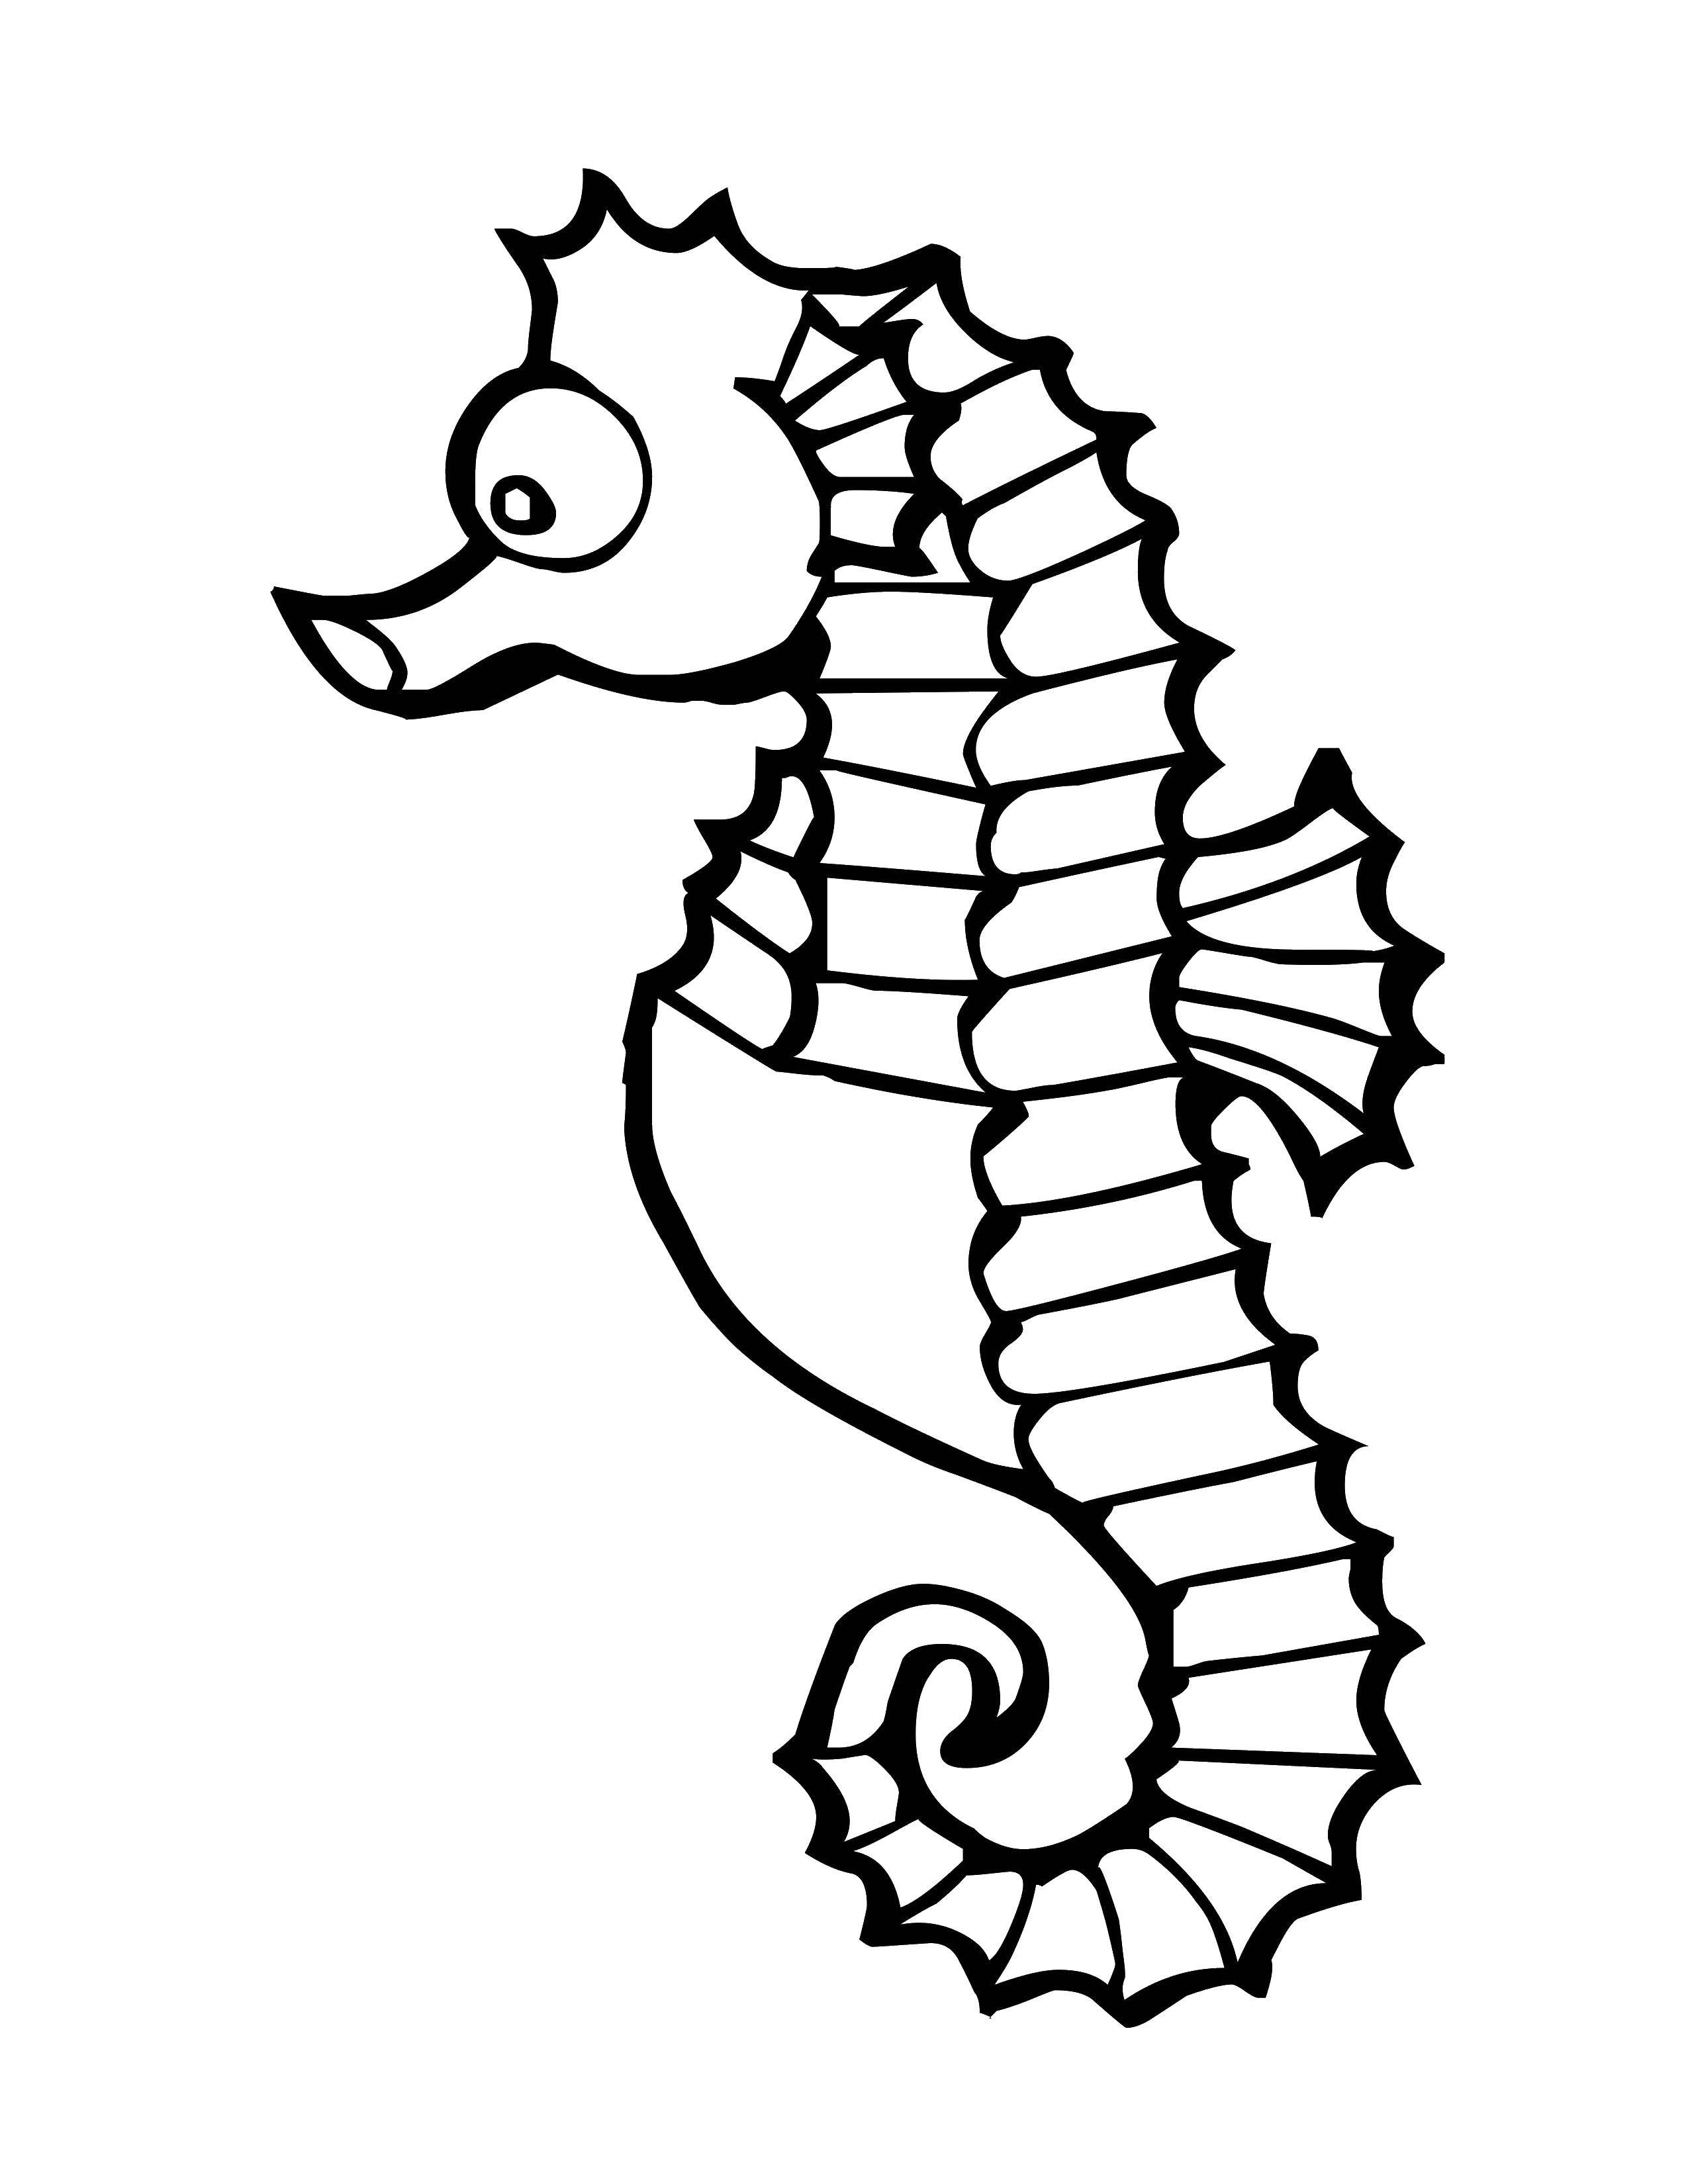 Coloring Seahorses are a genus of small, marine bony fishes. Category animals. Tags:  Seahorses.